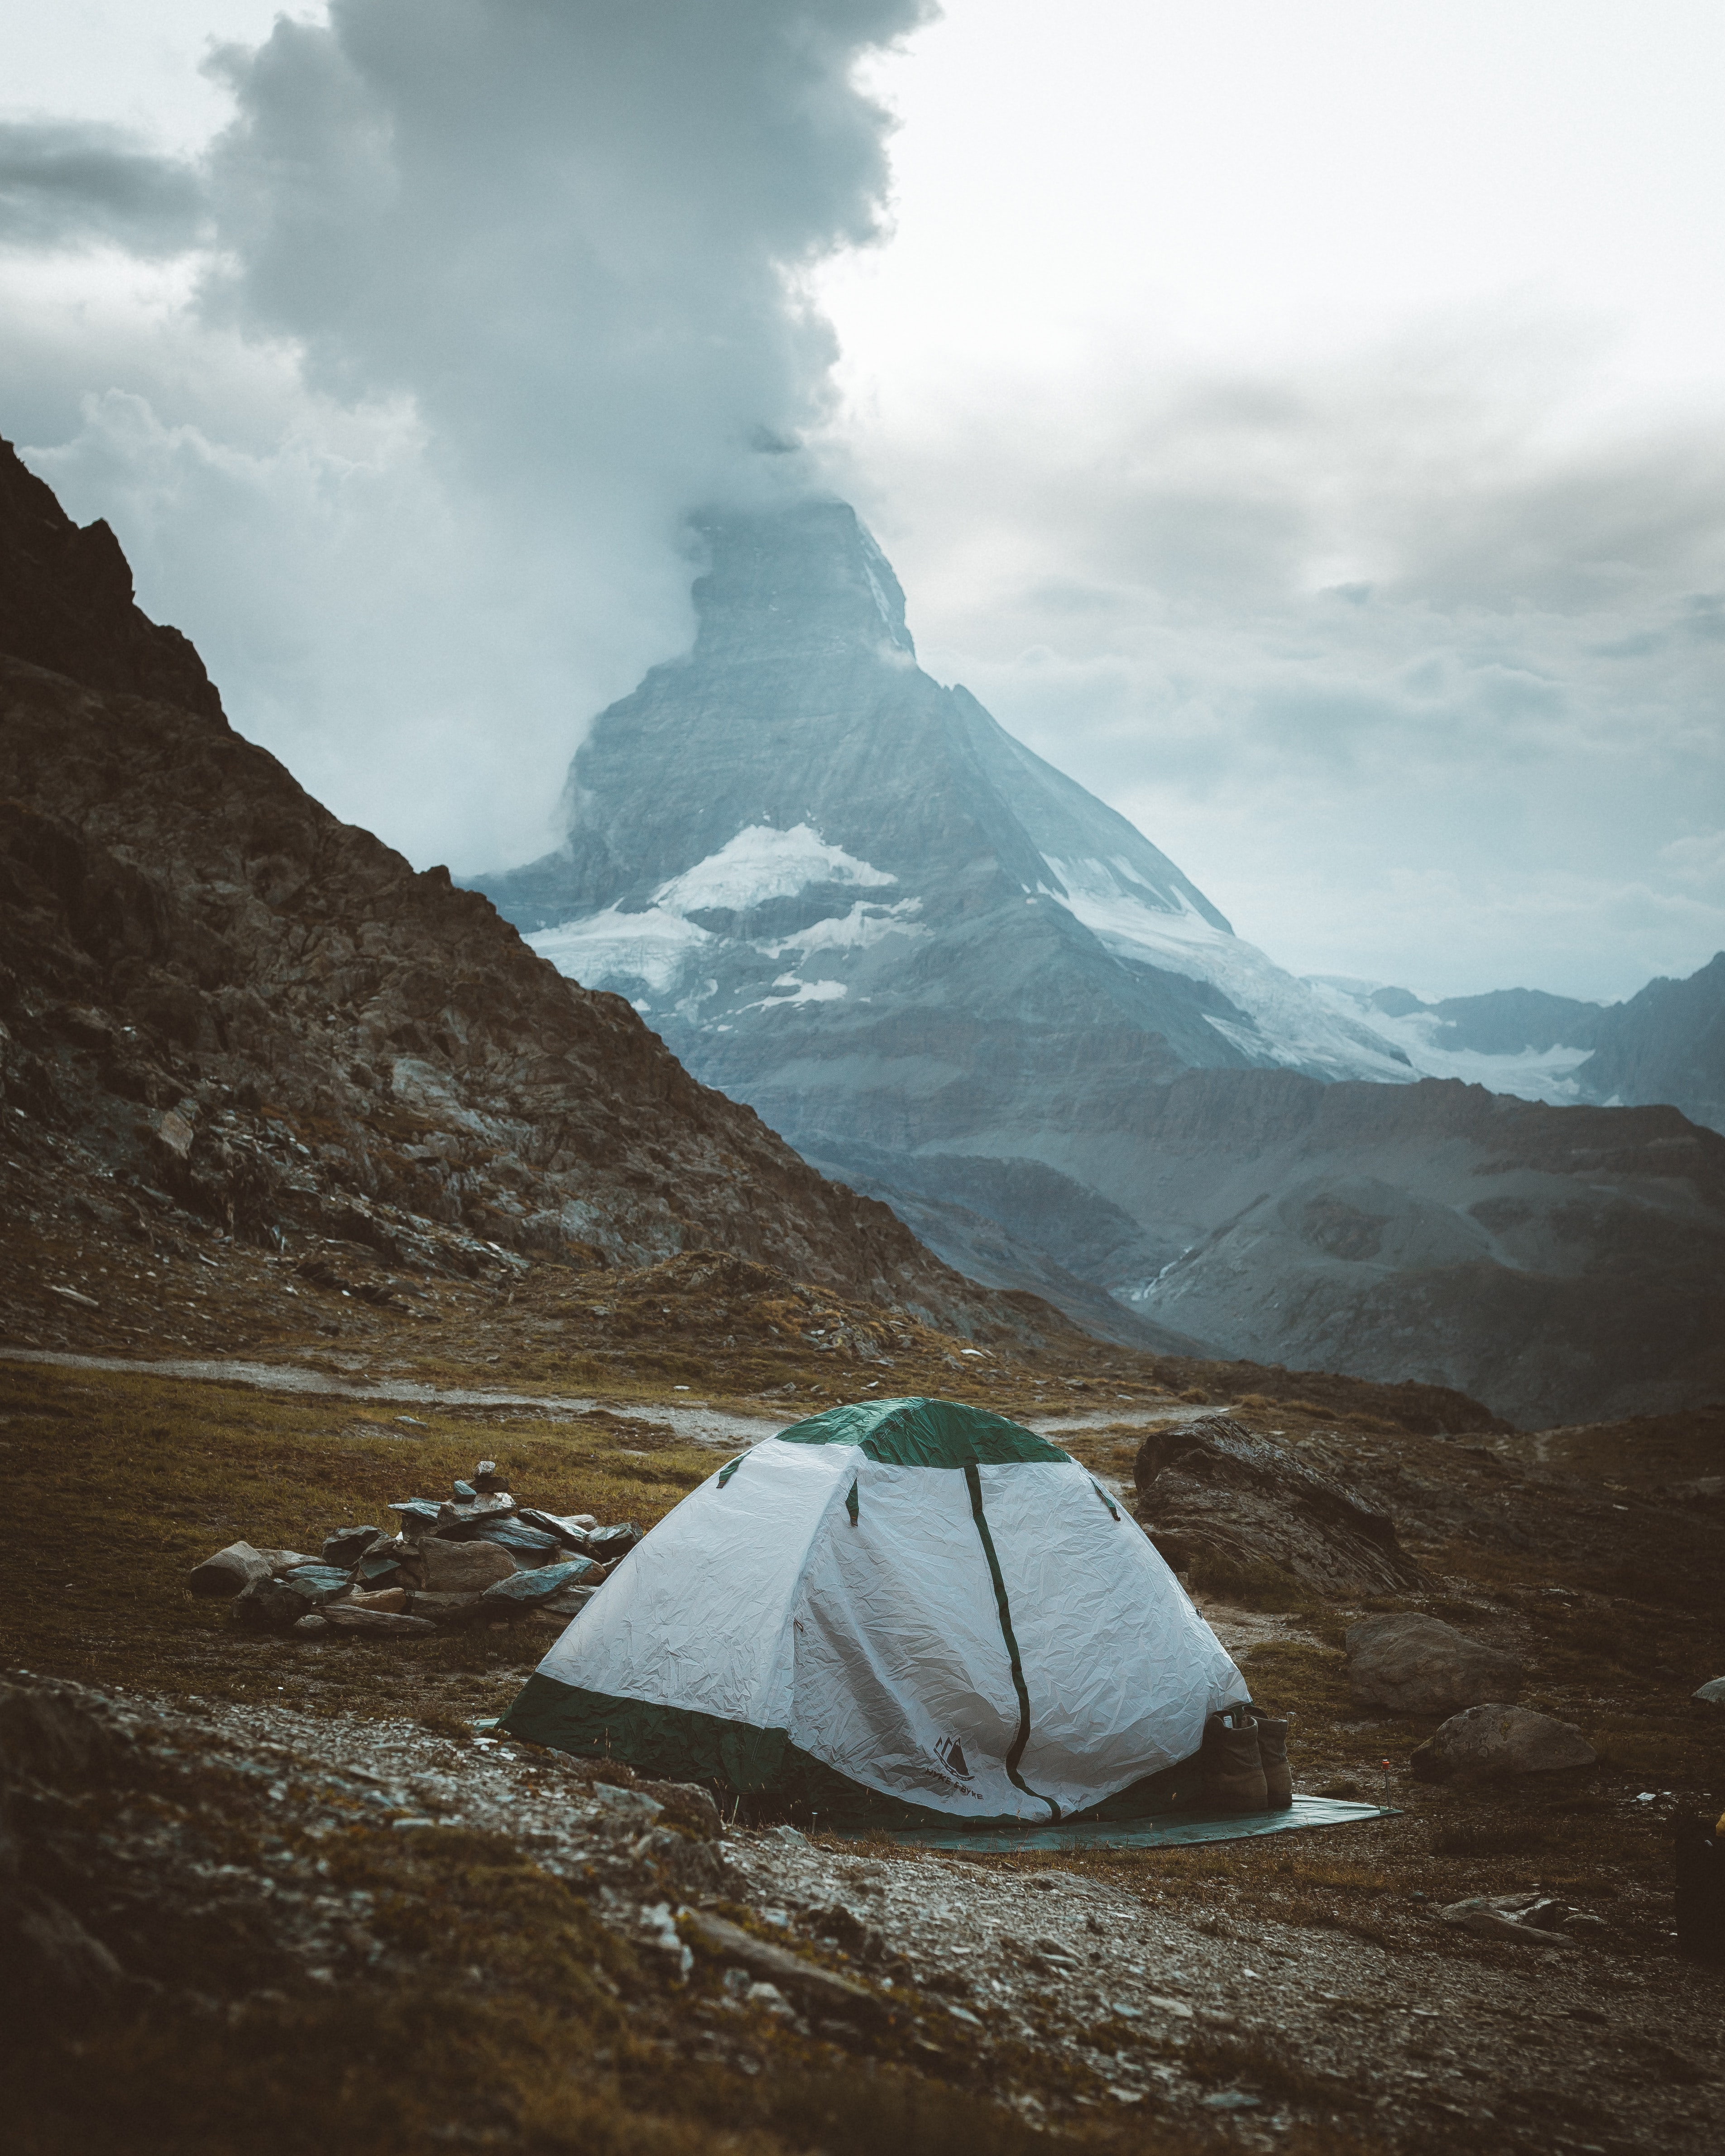 campsite, nature, mountains, rocks, tent, camping